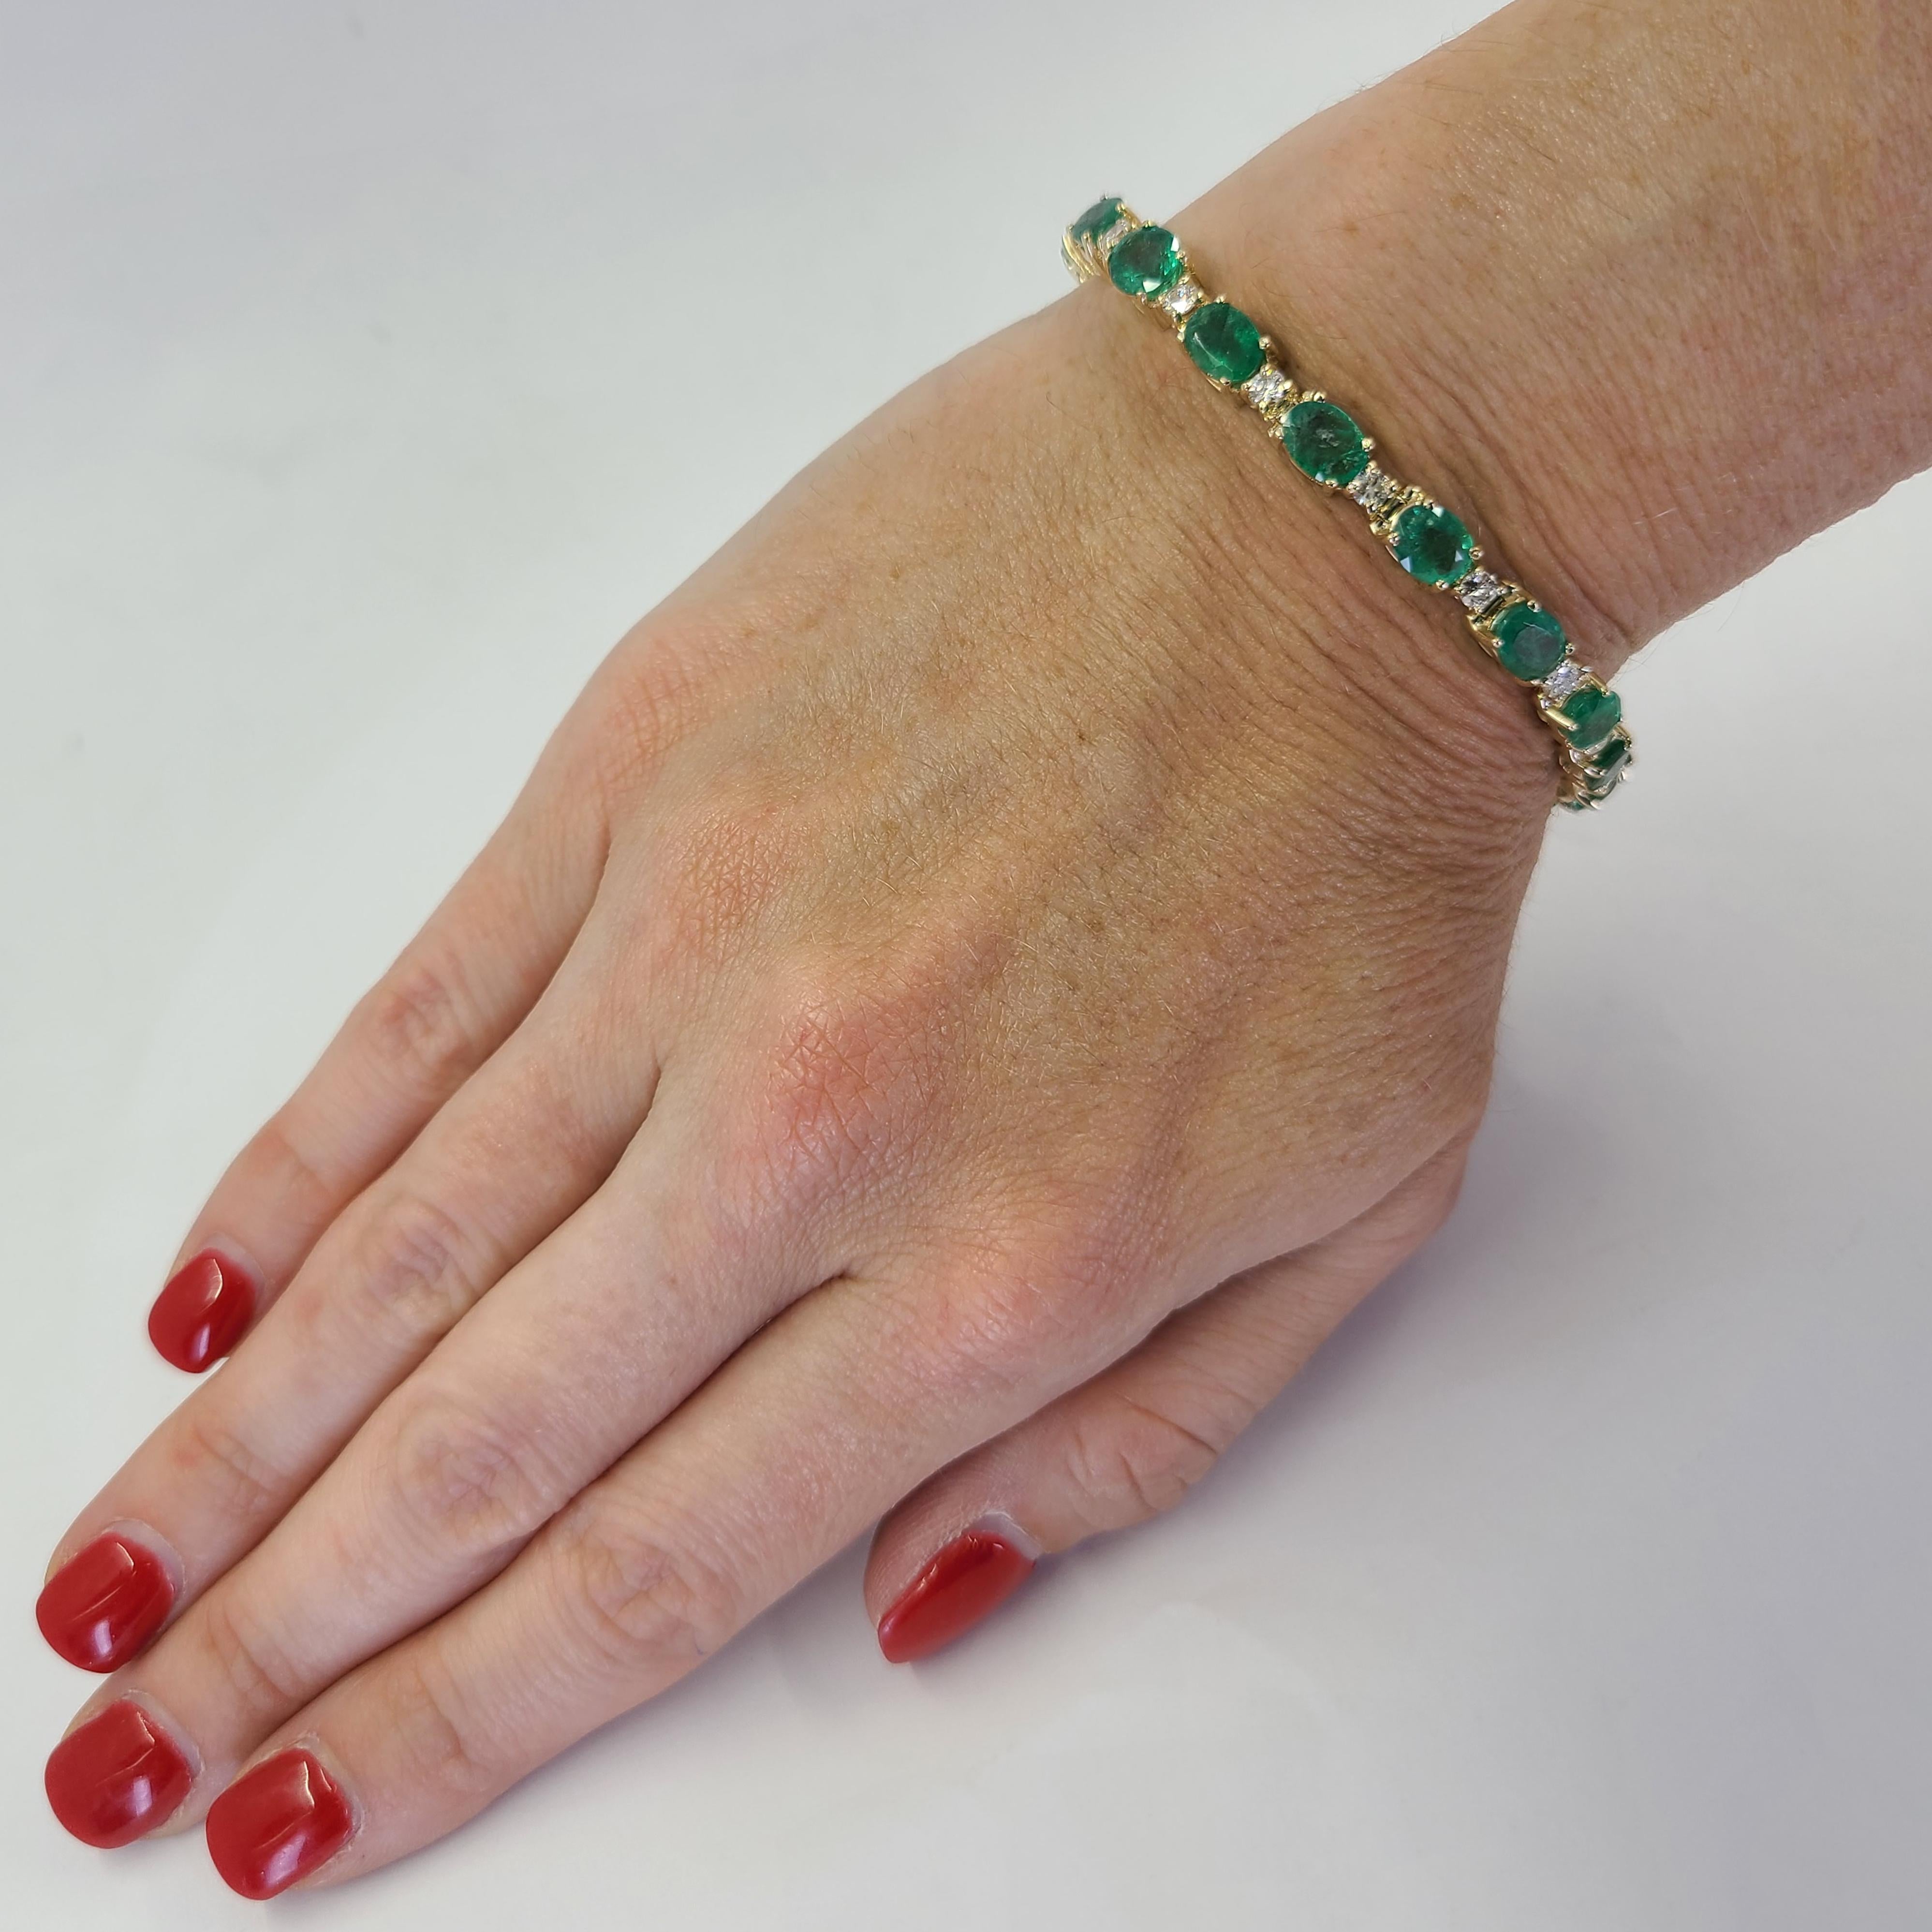 14 Karat Yellow Gold Bracelet Featuring 17 Oval Cut Emeralds Totaling Approximately 13.00 Carats and 17 Round Brilliant Cut Diamonds of SI Clarity and H Color Totaling 1.50 Carats. 7 Inch Length with Box Clasp and Figure 8 Safety Clasp. Finished